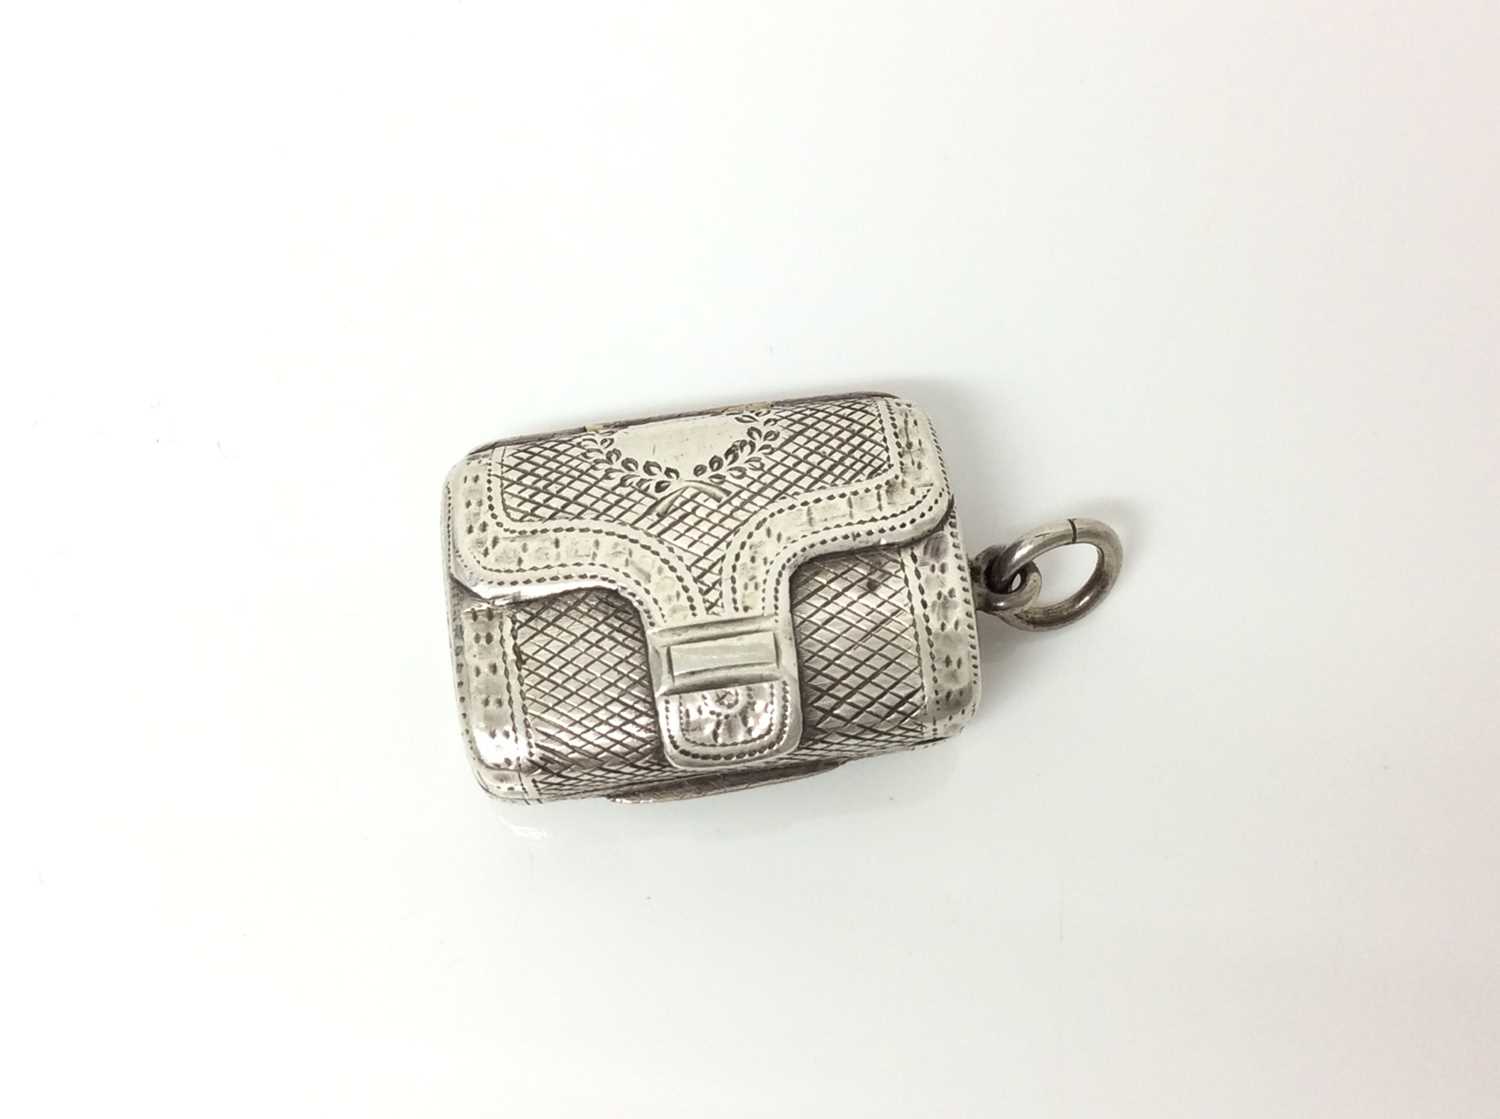 Lot 352 - George III silver vinaigrette in the form of a purse.